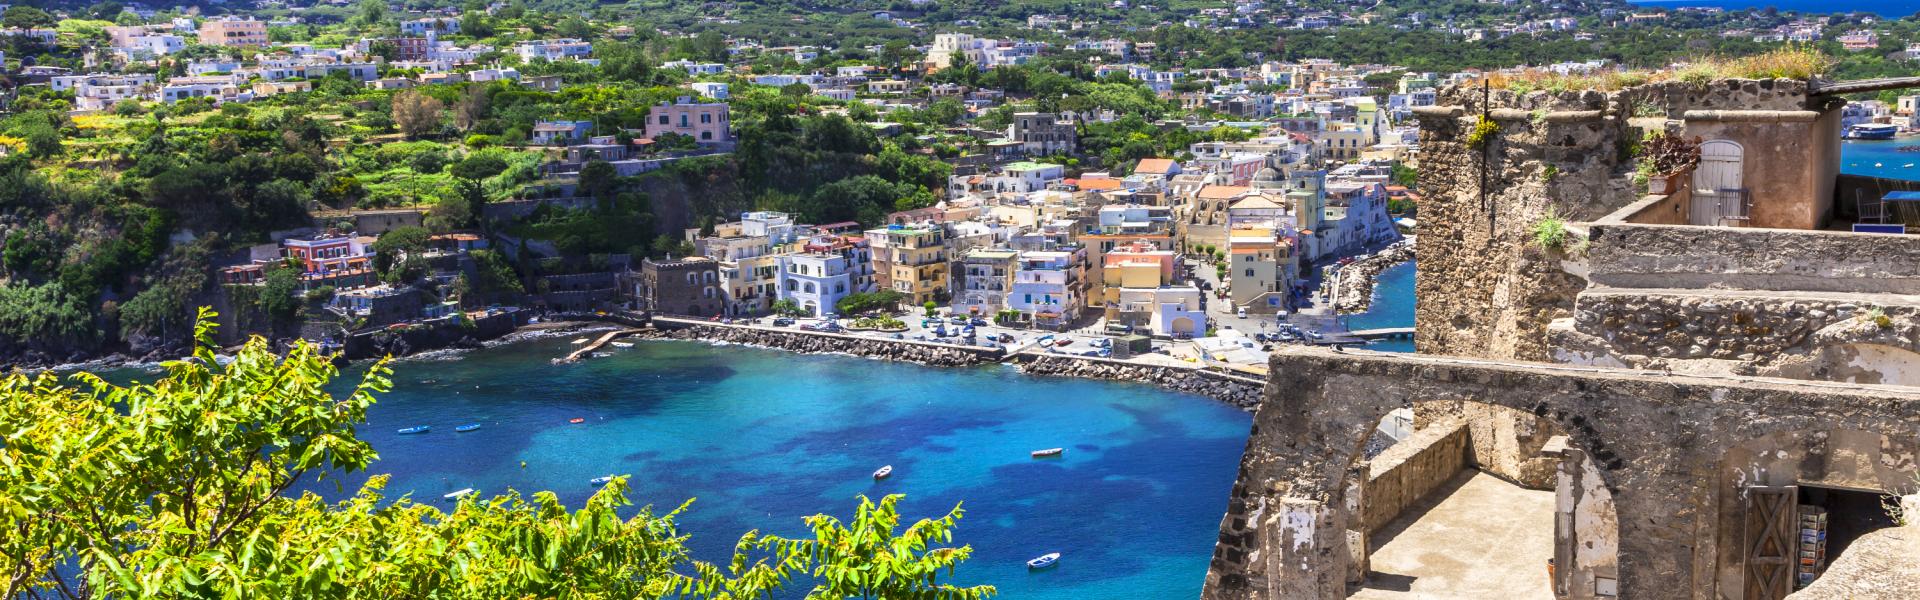 Find the perfect vacation home on Ischia - Casamundo